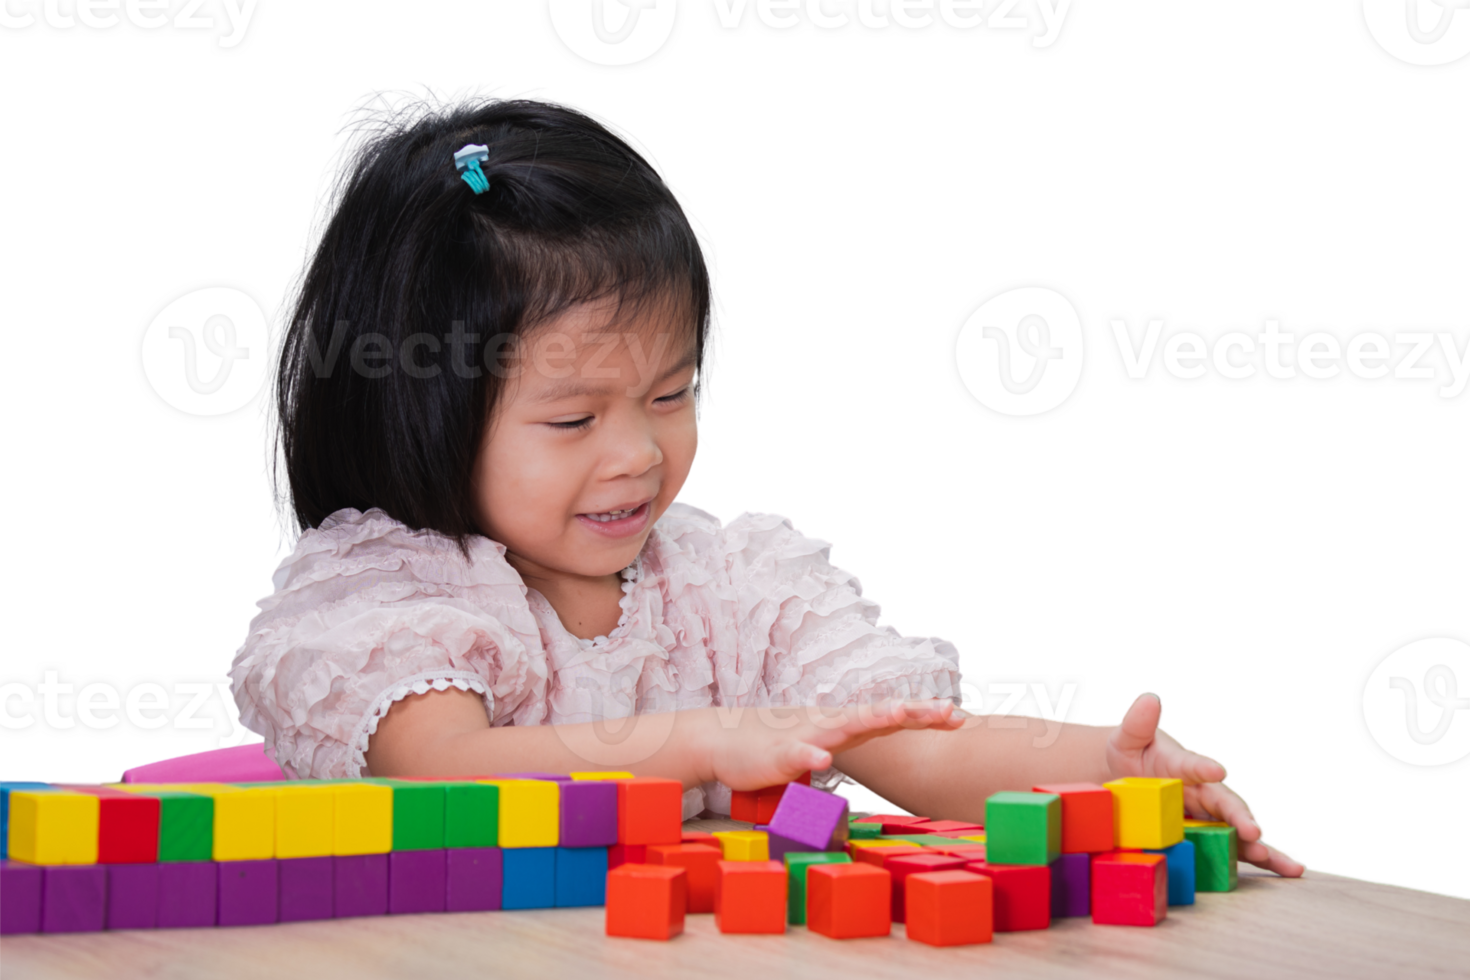 Cute Kid Girl is Playing with Colorful Wooden Blocks Placed on the Table, Children have Fun with Imagination, Construction, Creativity. Hours of rest, learning through play. Isolated background. png